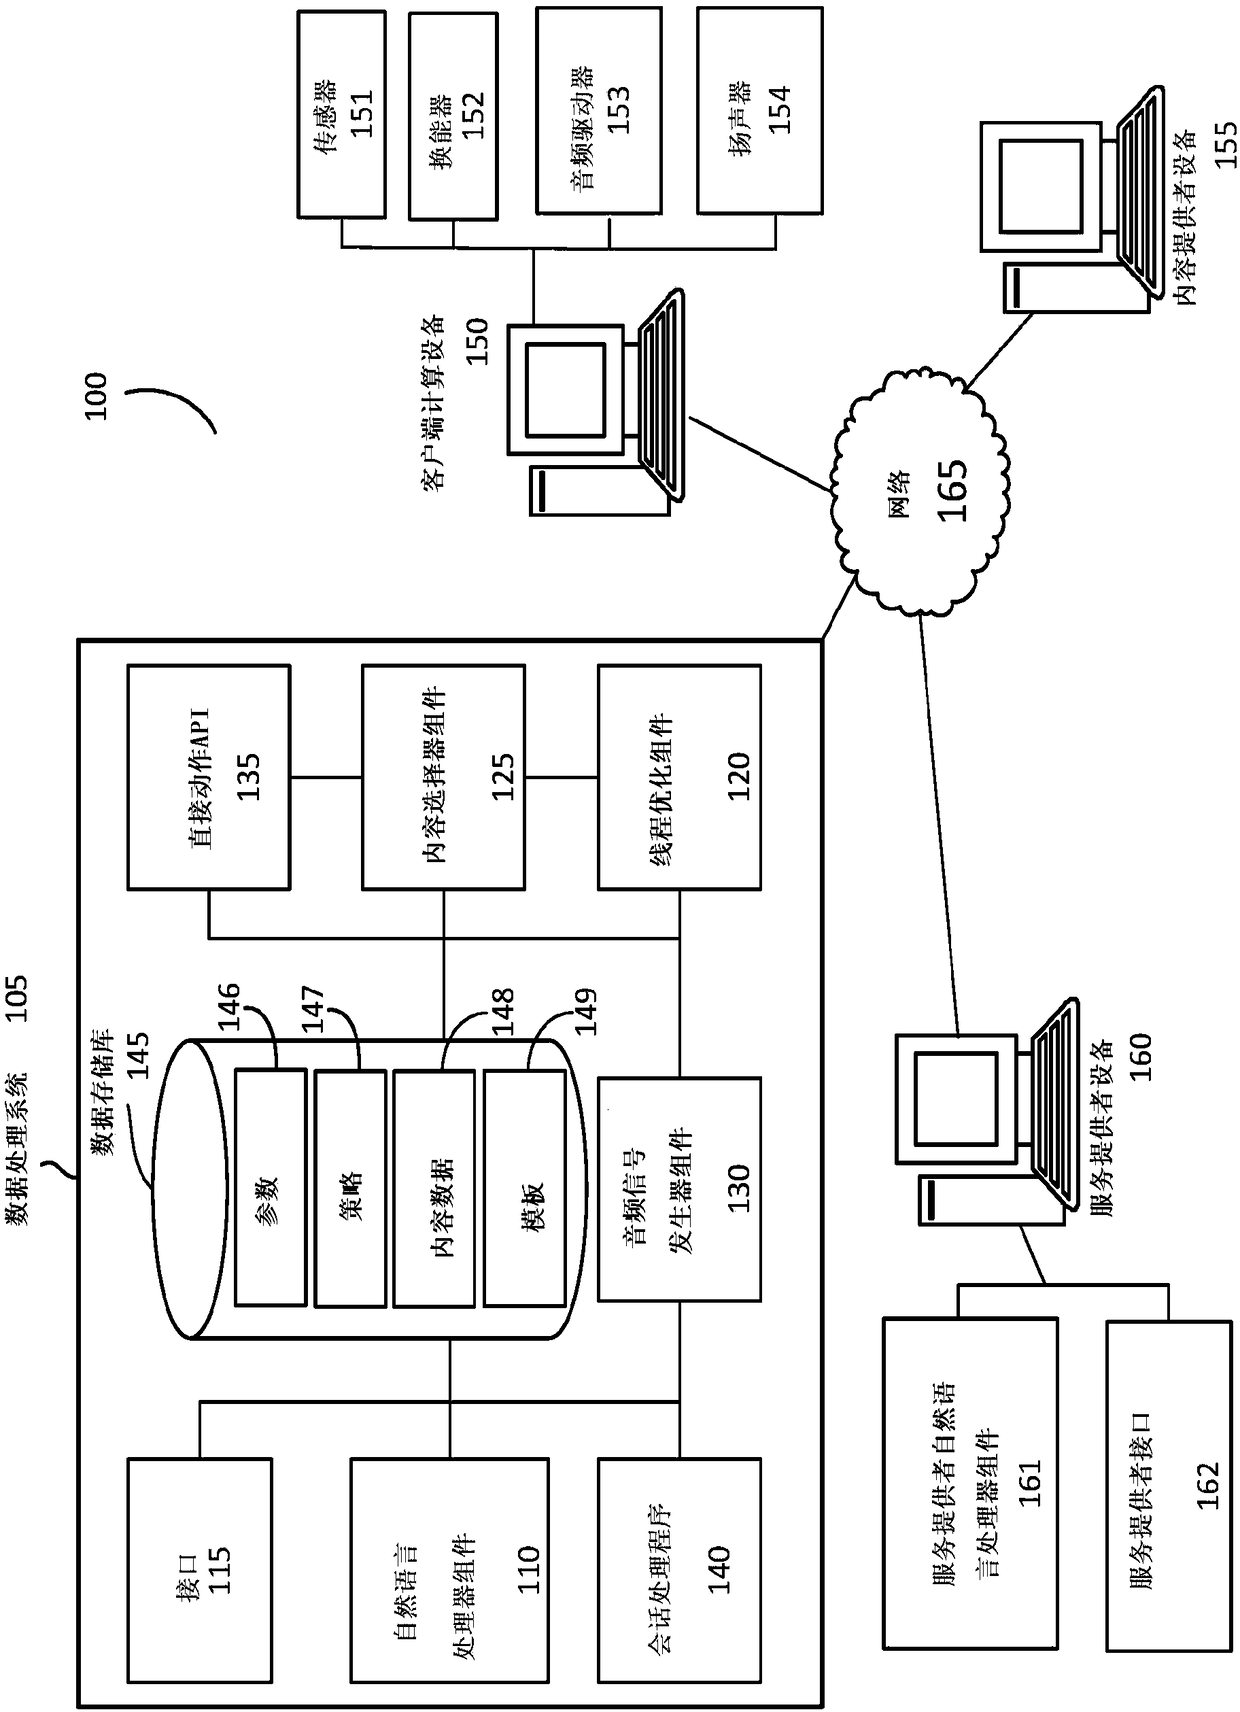 Sequence dependent data message consolidation in a voice activated computer network environment